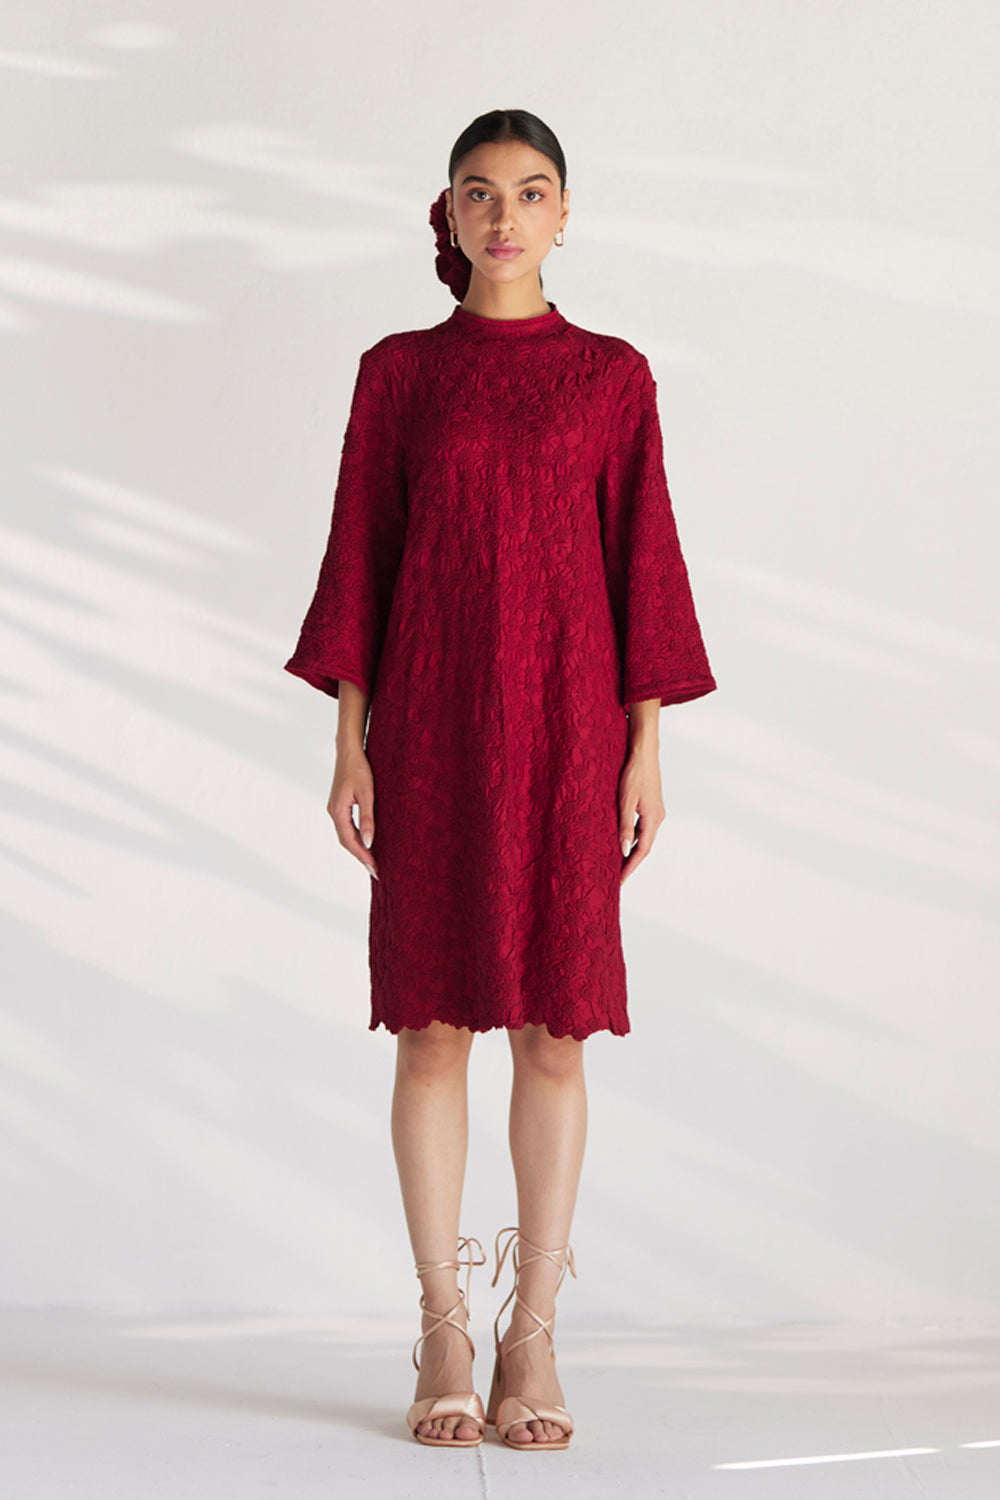 Red Picturesque Smock Dress